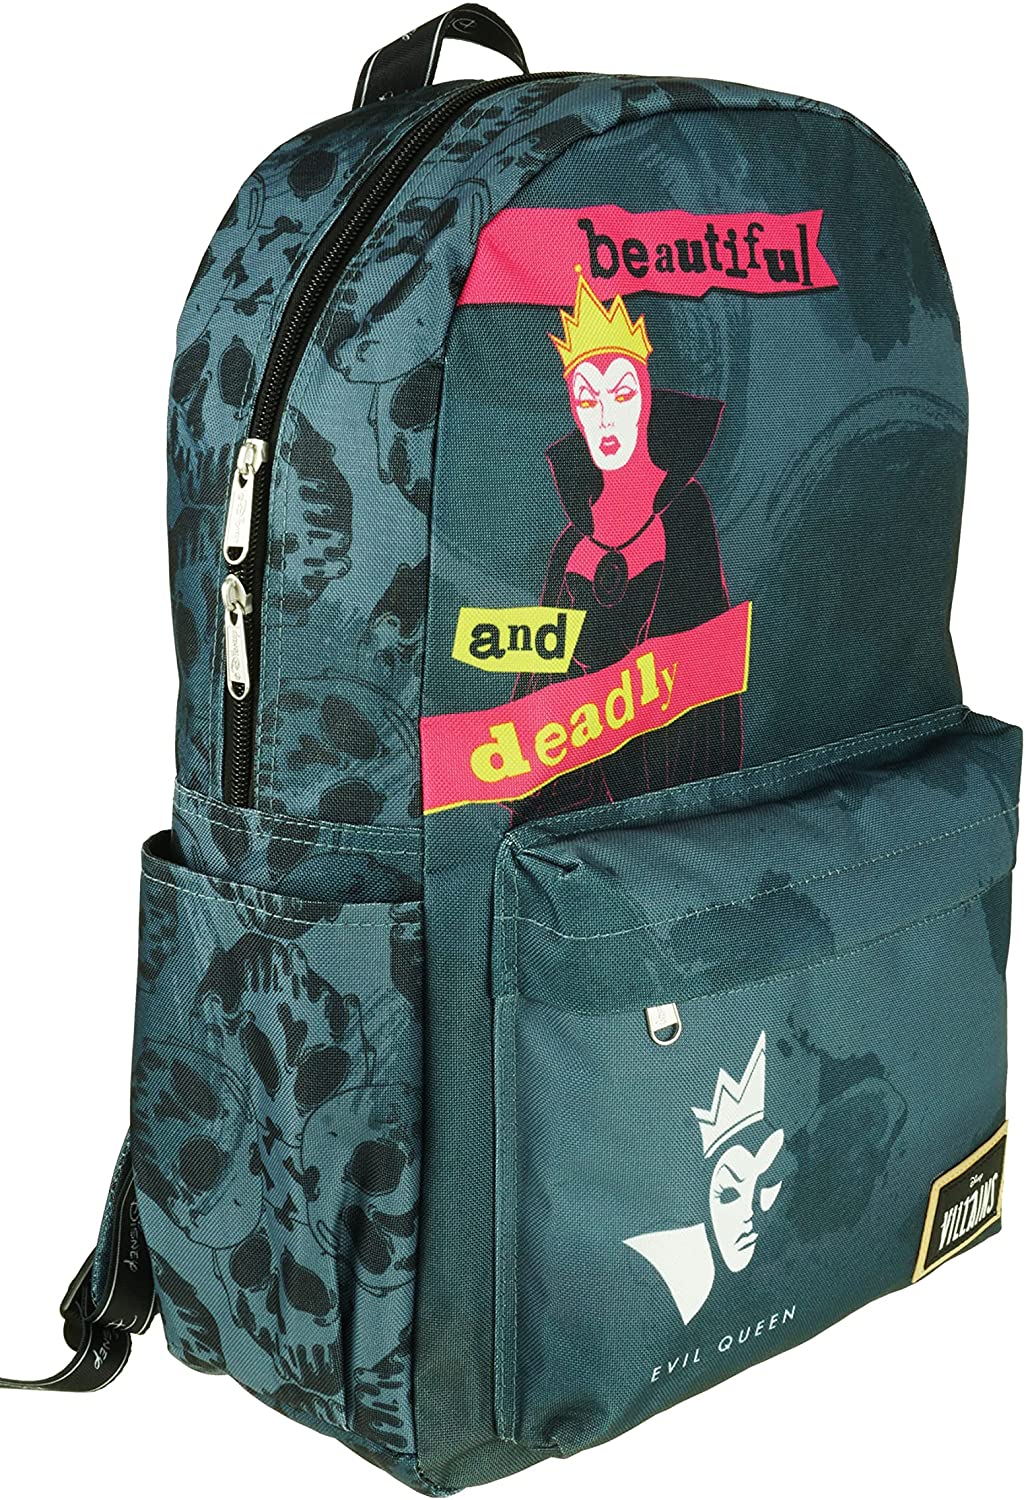 Classic Disney Villains - Evil Queen Backpack with Laptop Compartment for School (Evil Queen) - GTE Zone